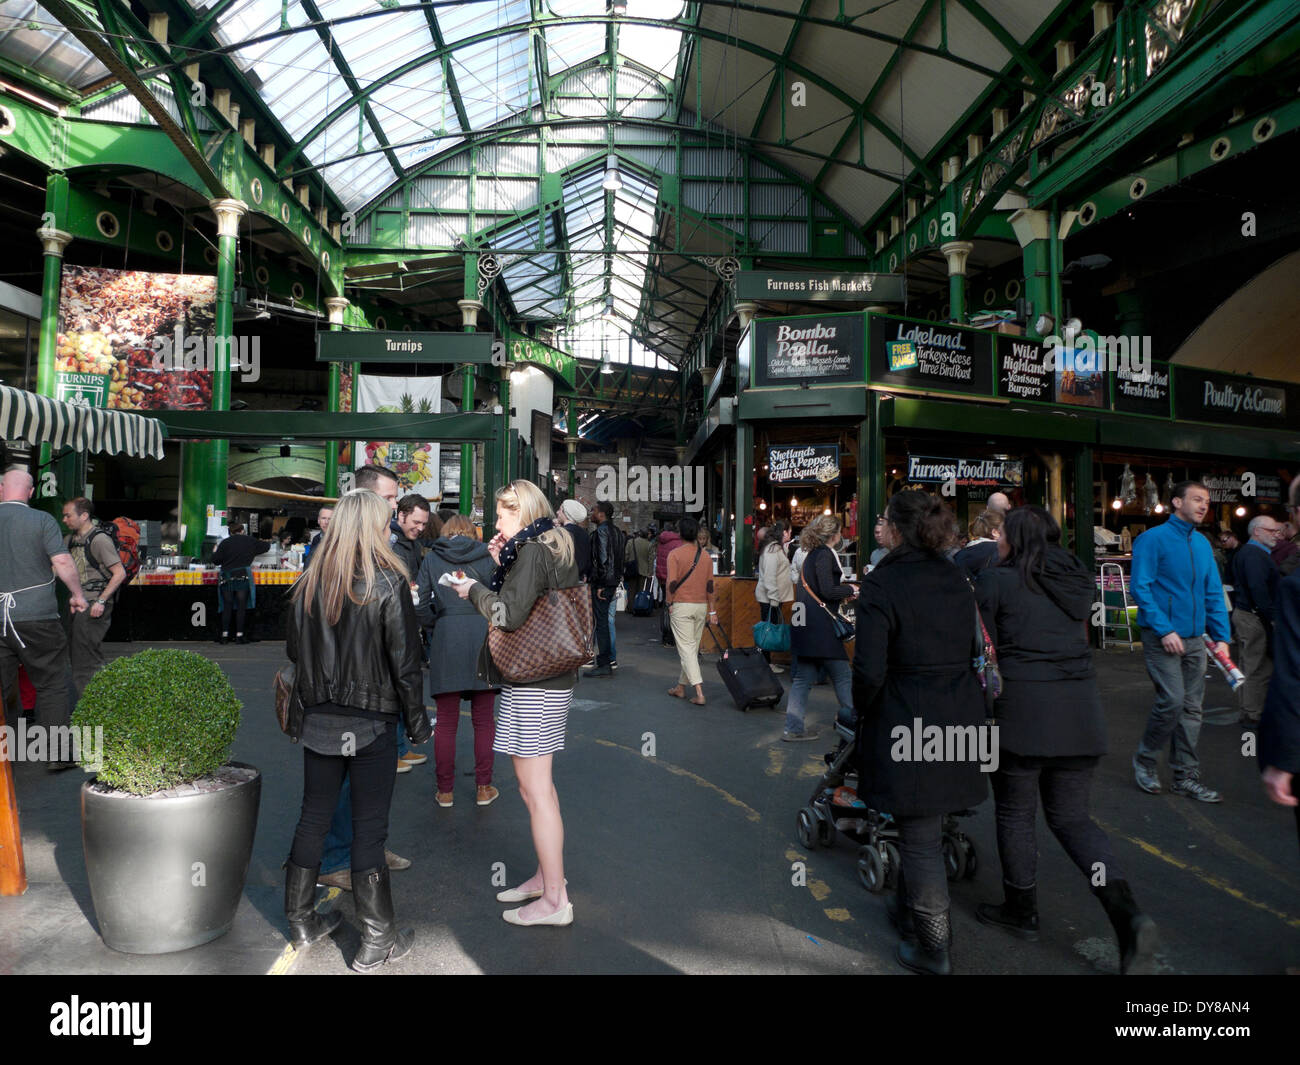 Intside view of people eating and at food stalls in Borough Market, Southwark London, UK  KATHY DEWITT Stock Photo